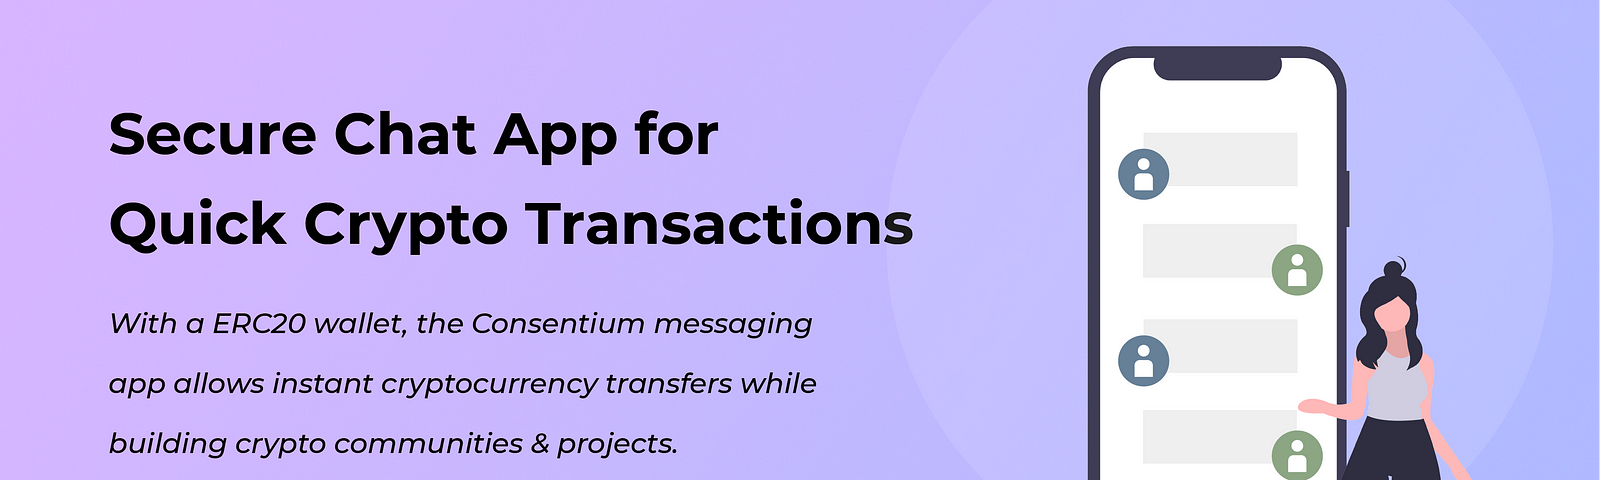 Secure Chat App for Quick Crypto Transactions | Consentium